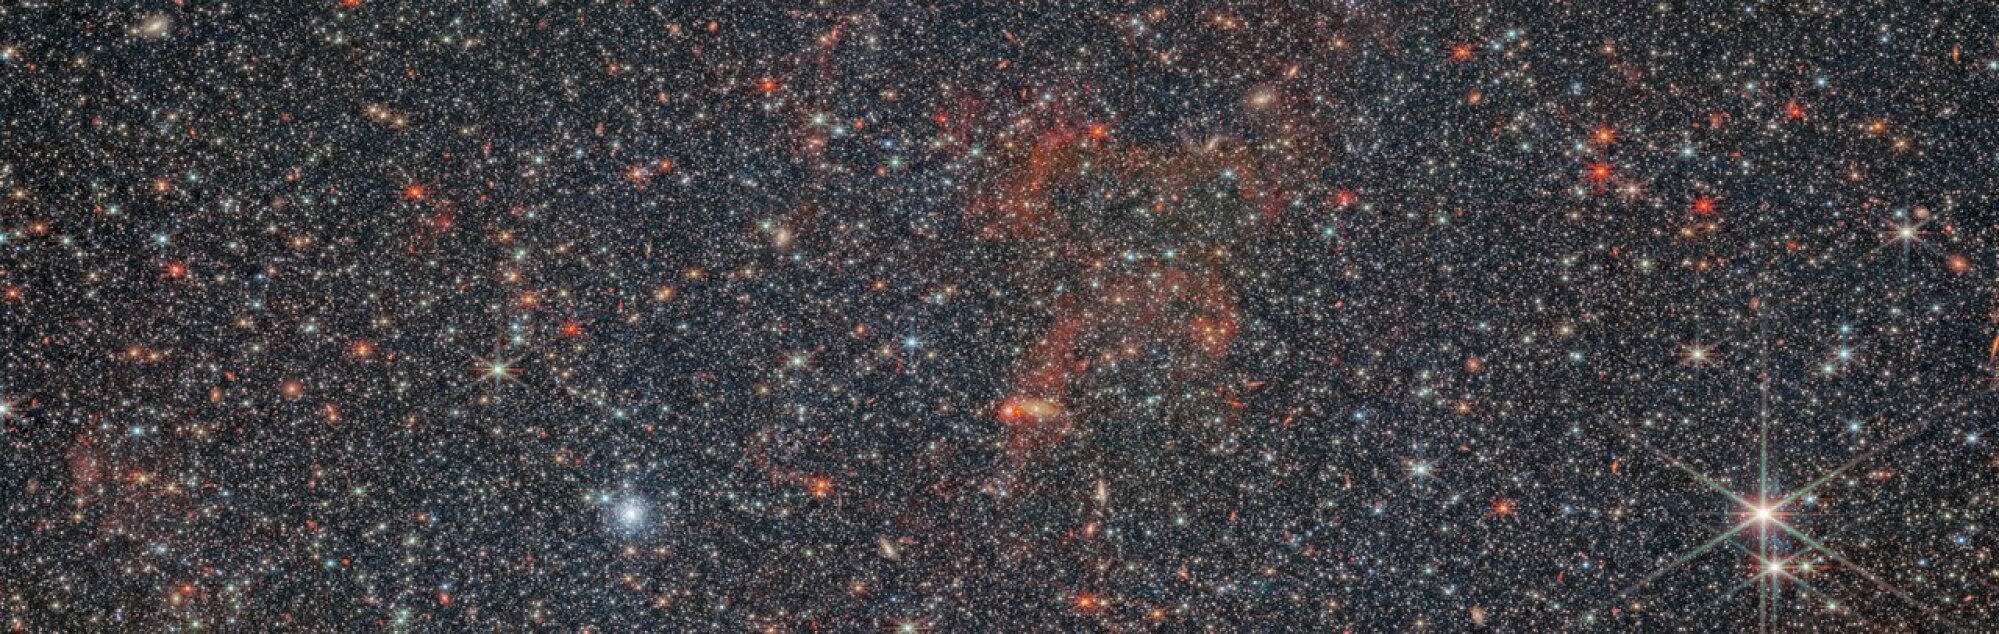 Countless stars in the galaxy NGC 6822.